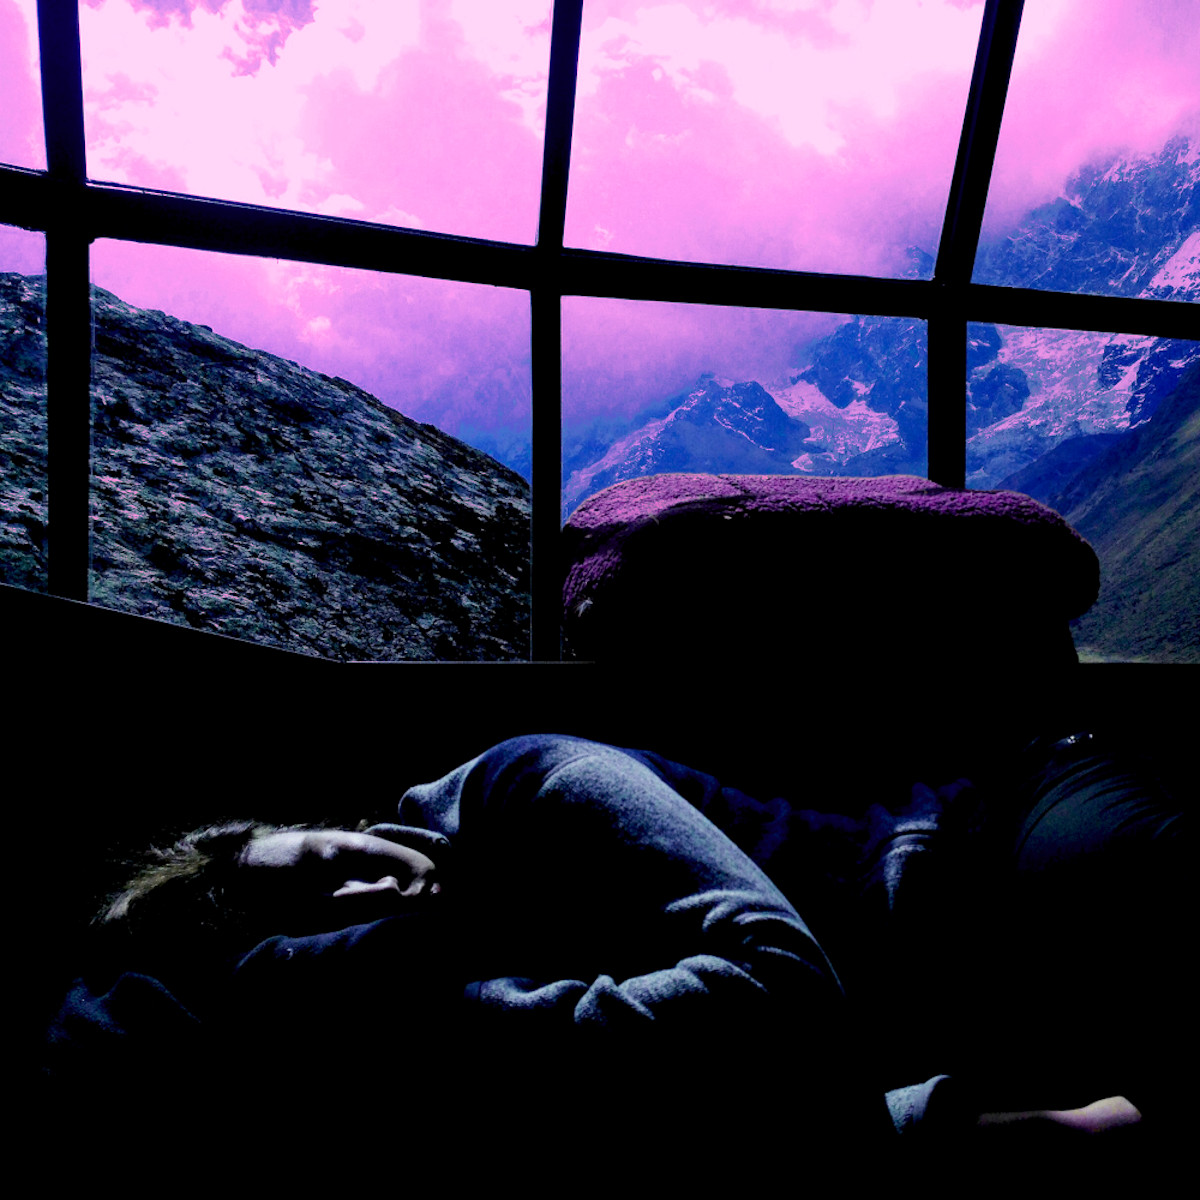 Sleeping in front of a large window with the world behind